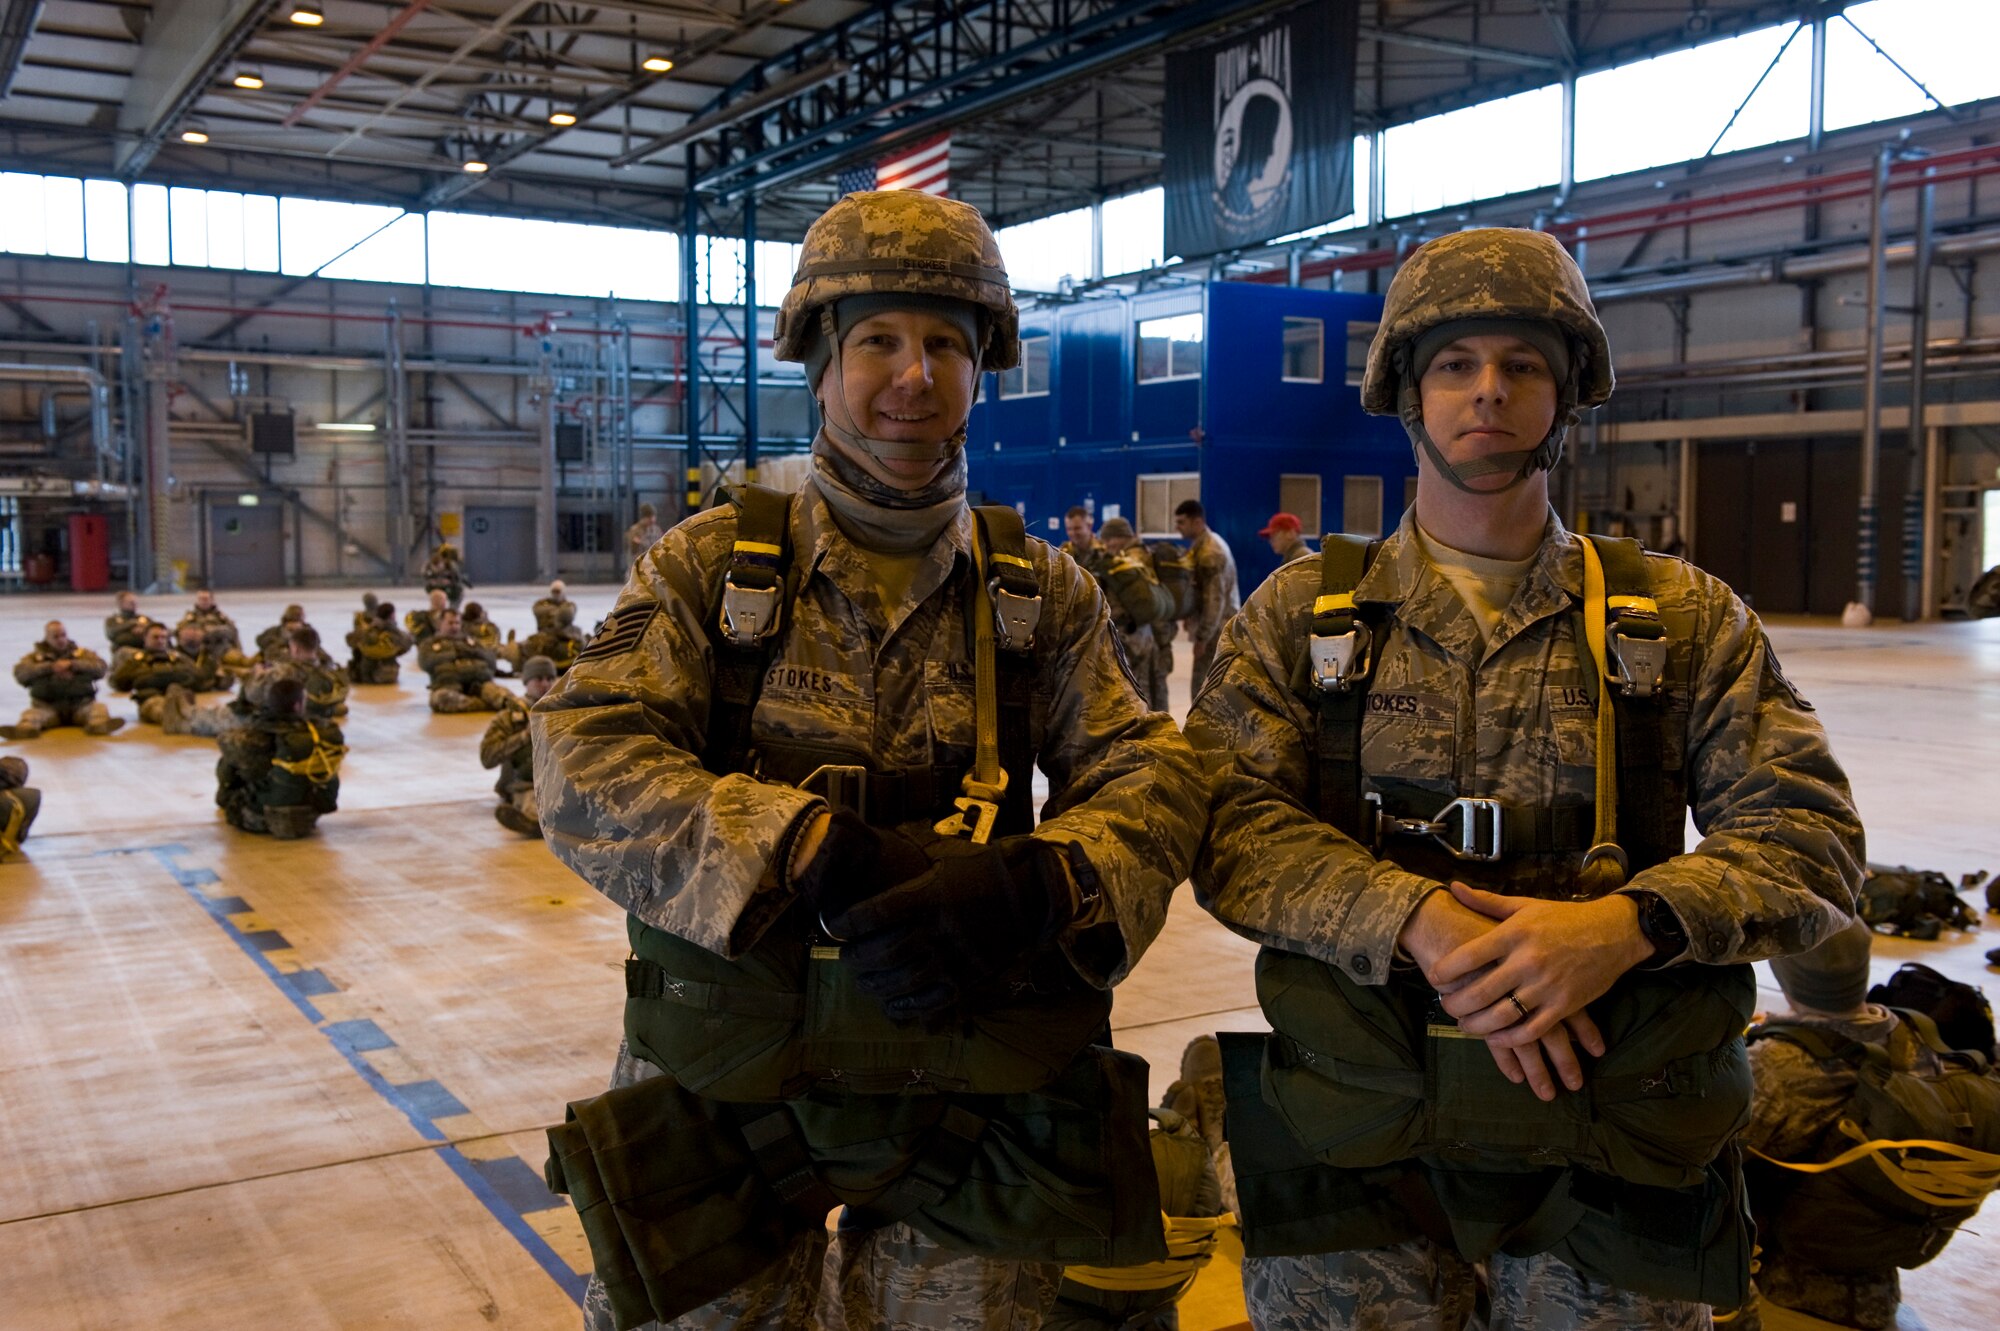 U.S. Air Force Technical Sergeant Raymond Stokes (left) and Staff Sergeant Jesse Stokes, both engineers with the 435th Security Forces Squadron and first cousins, pose for a photo before loading onto a C-130J Hercules, from Ramstein Air Base, Germany, in preparation for a training airdrop over drop zone Marnheim, Germany, Feb. 10, 2011. The single C-130J aircraft from the 37th Airlift Squadron, 86th Airlift Wing dropped more than fifty service members at the drop site.  (U.S. Air Force photo/TSgt Wayne Clark, AFNE Regional News Bureau) (Released)